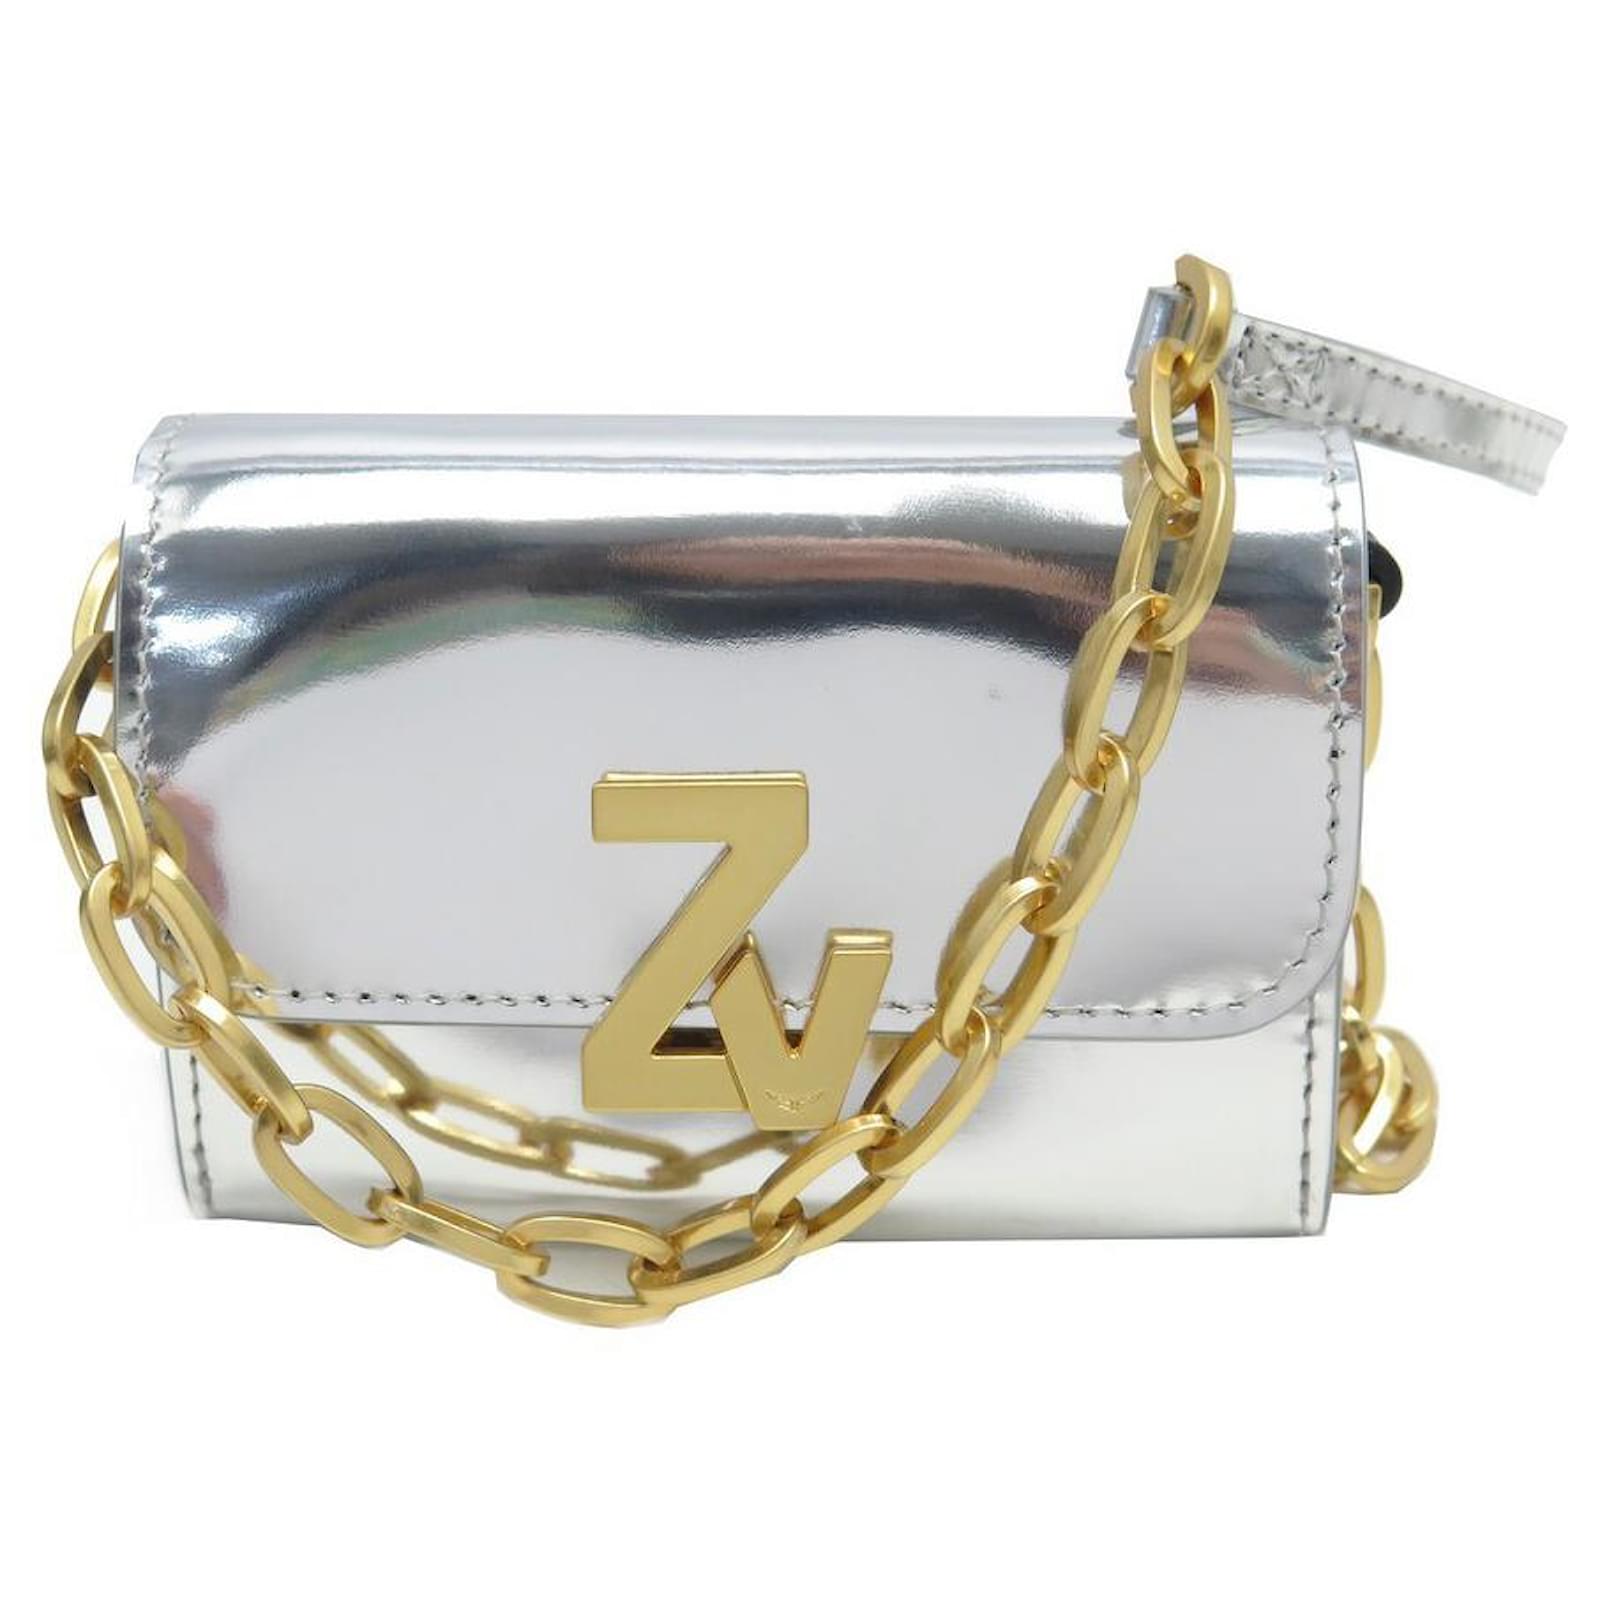 Zadig & Voltaire - Guess which one I chose !? Meet our new MINI ZV